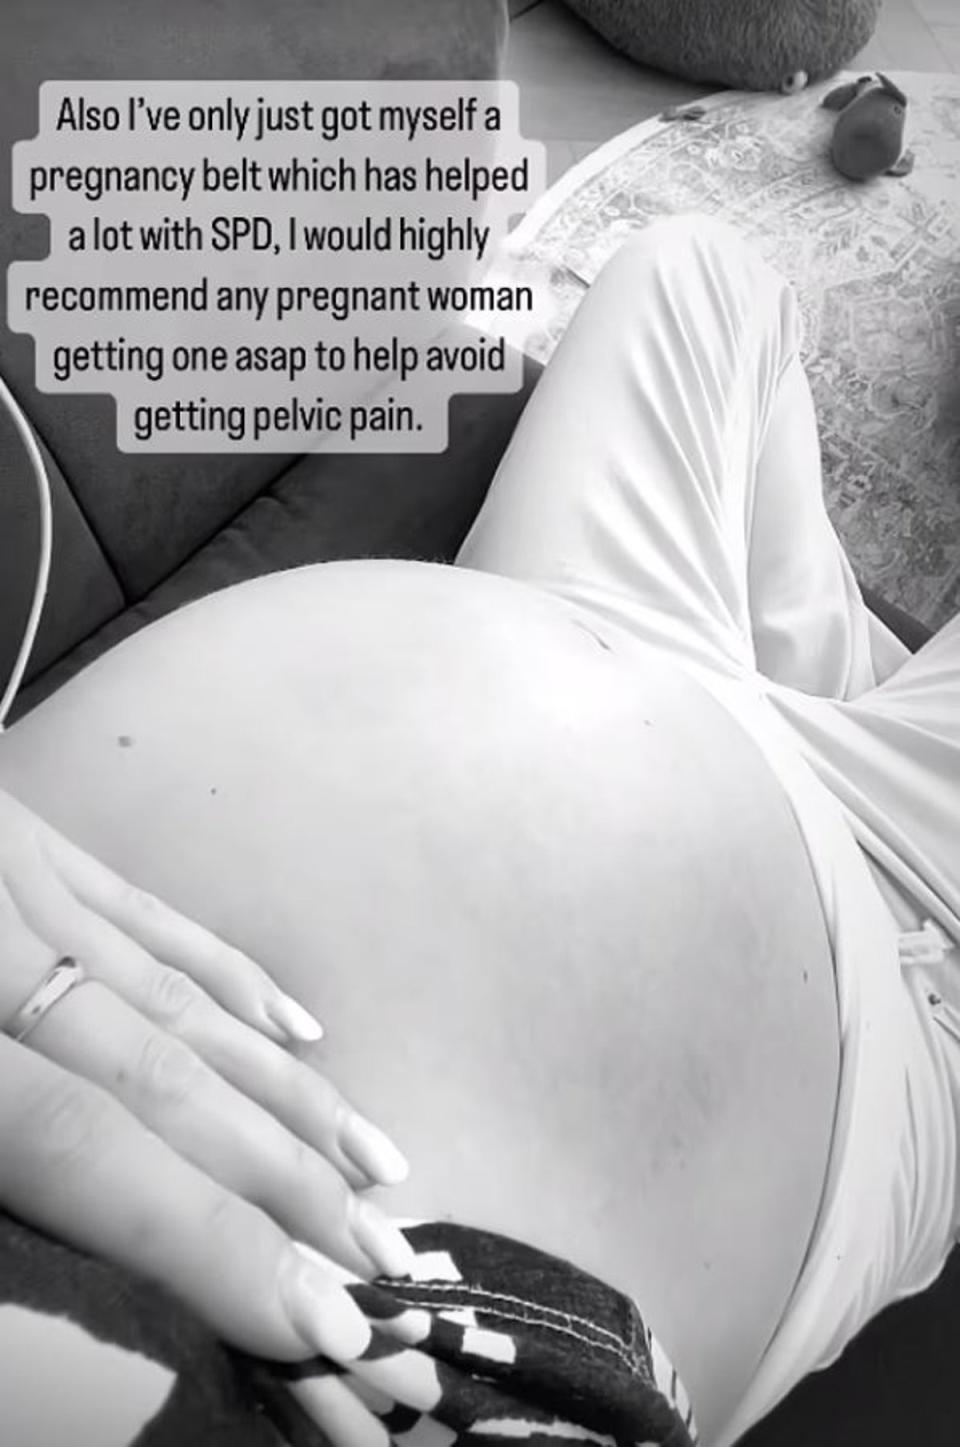 The model urged pregnant followers to talk to their doctor and use a pregnancy belt if they too are experiencing pain (Instagram/Roxy Horner)